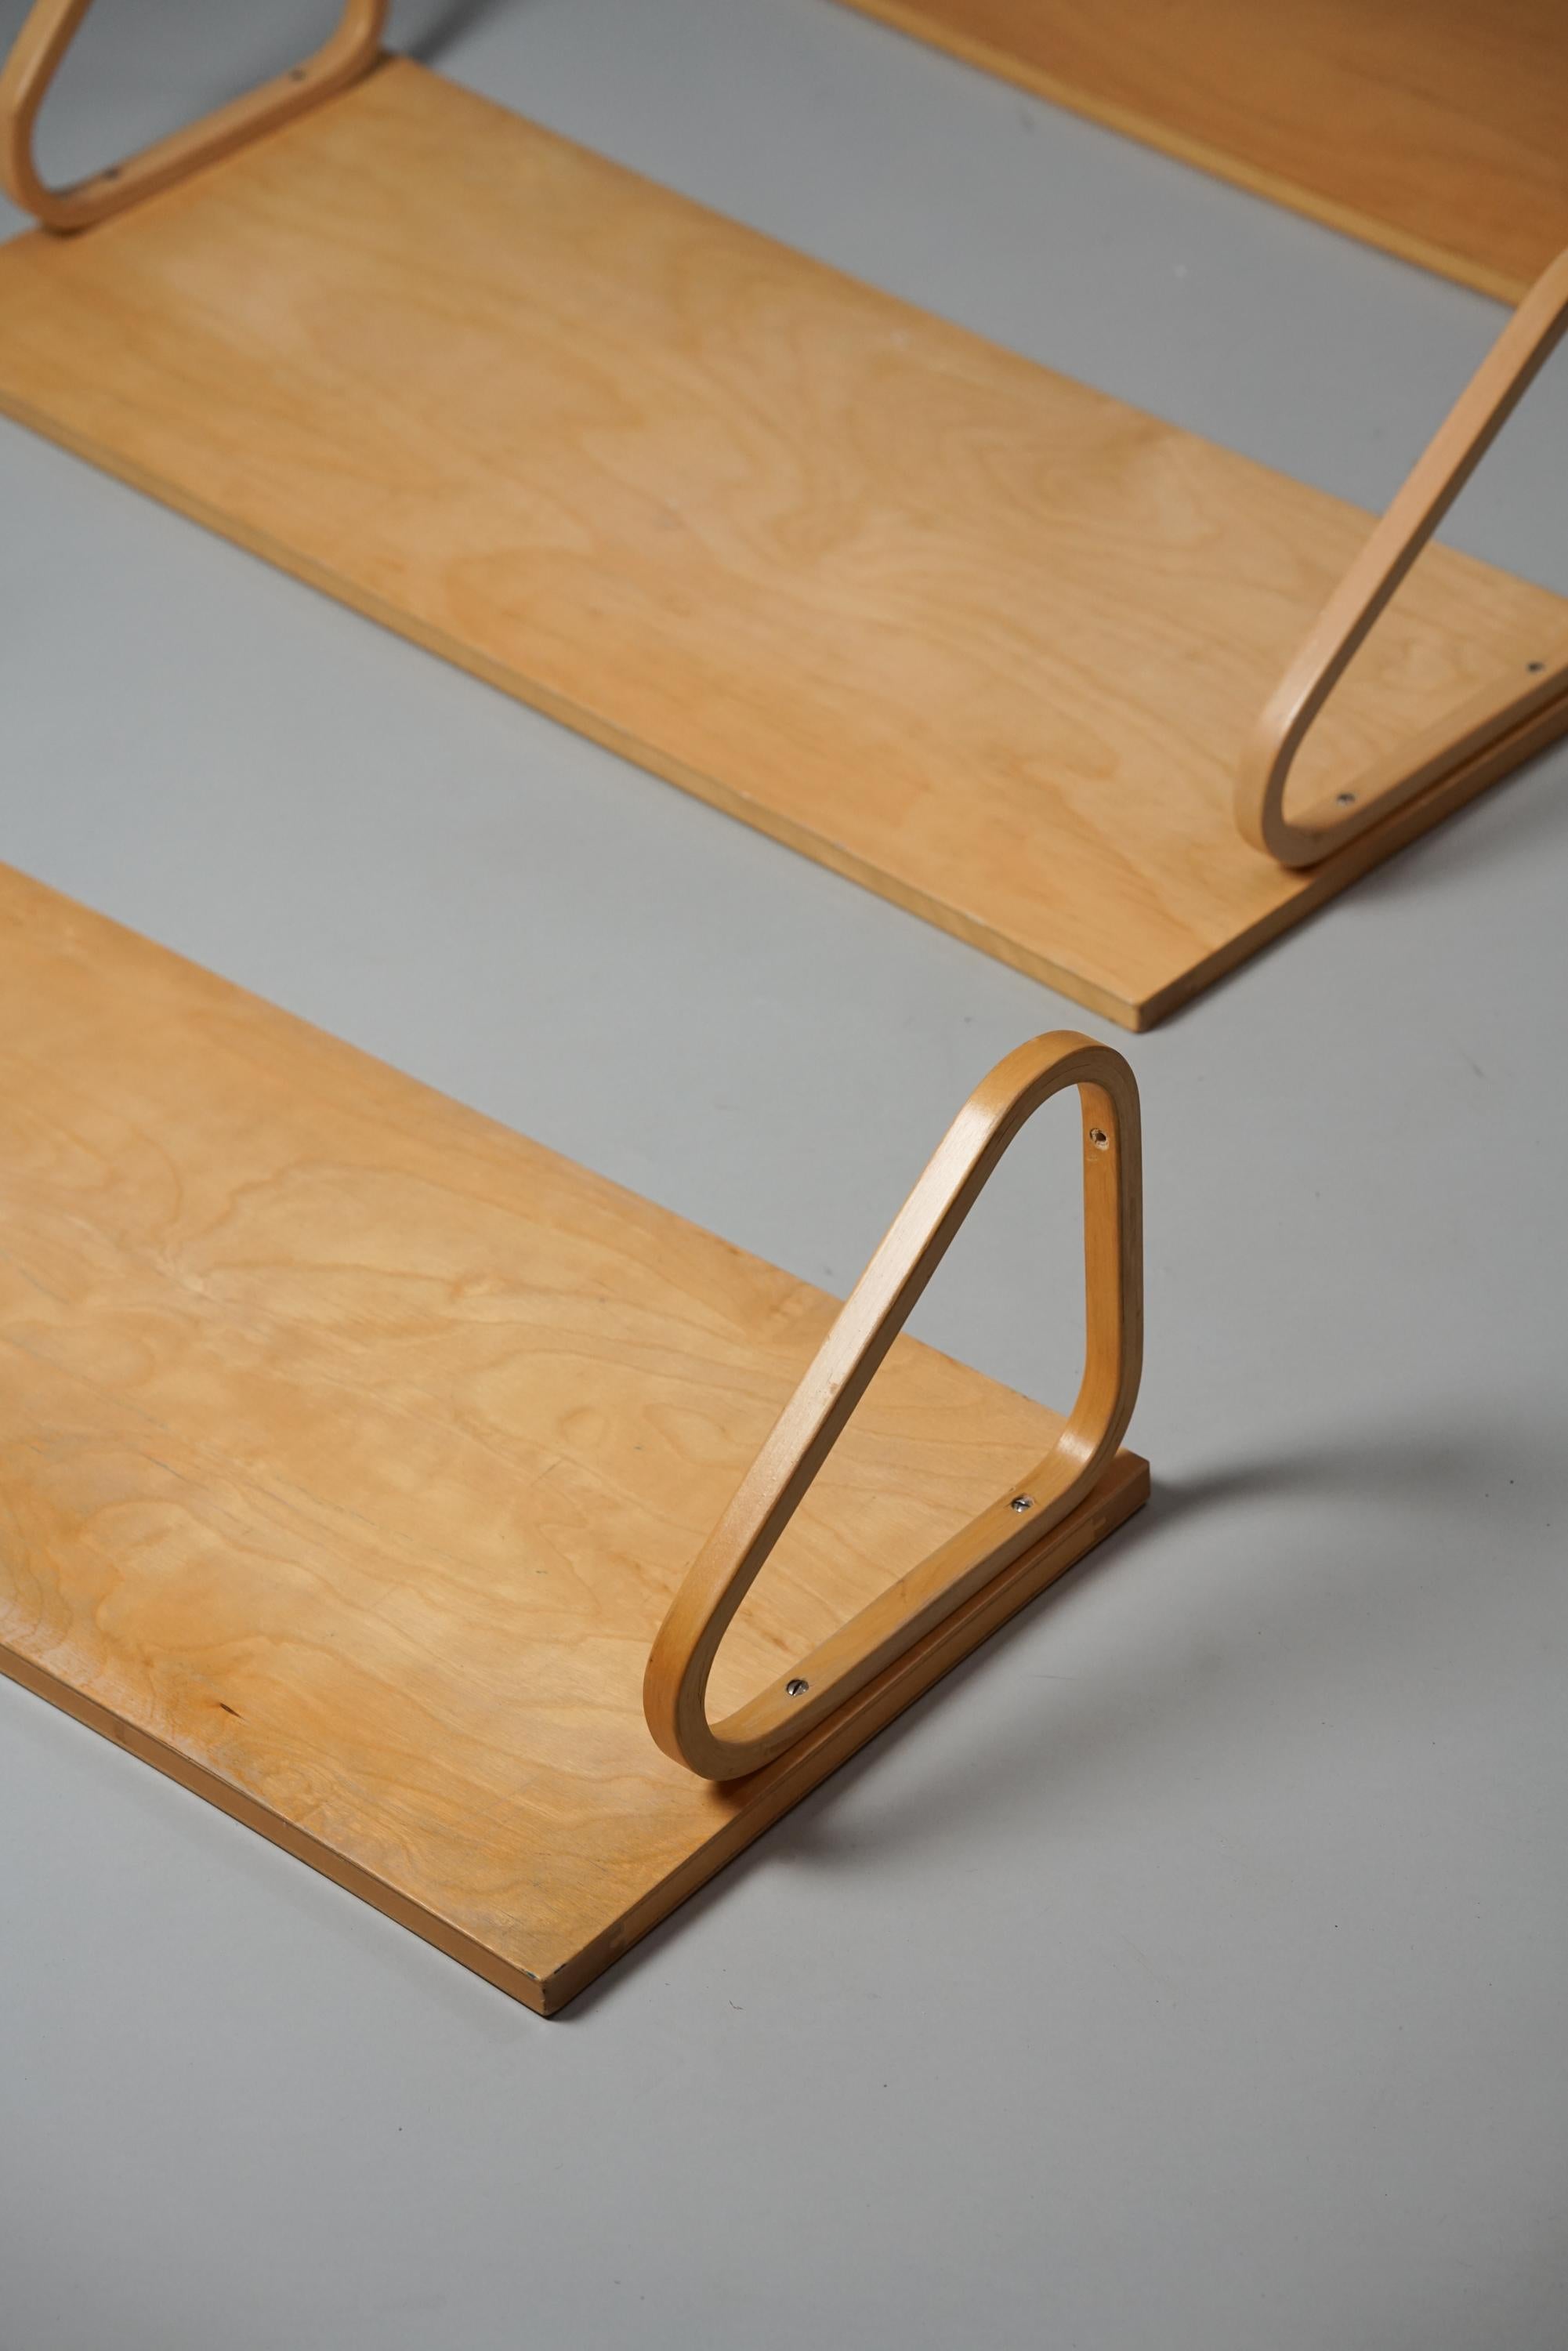 Set of three model 112A shelves, designed by Alvar Aalto, manufactured by Artek, 1960s. Birch. Good vintage condition, minor patina consistent with age and use. The shelves are sold as a set. 

Alvar Aalto (1898-1976) is probably the most famous